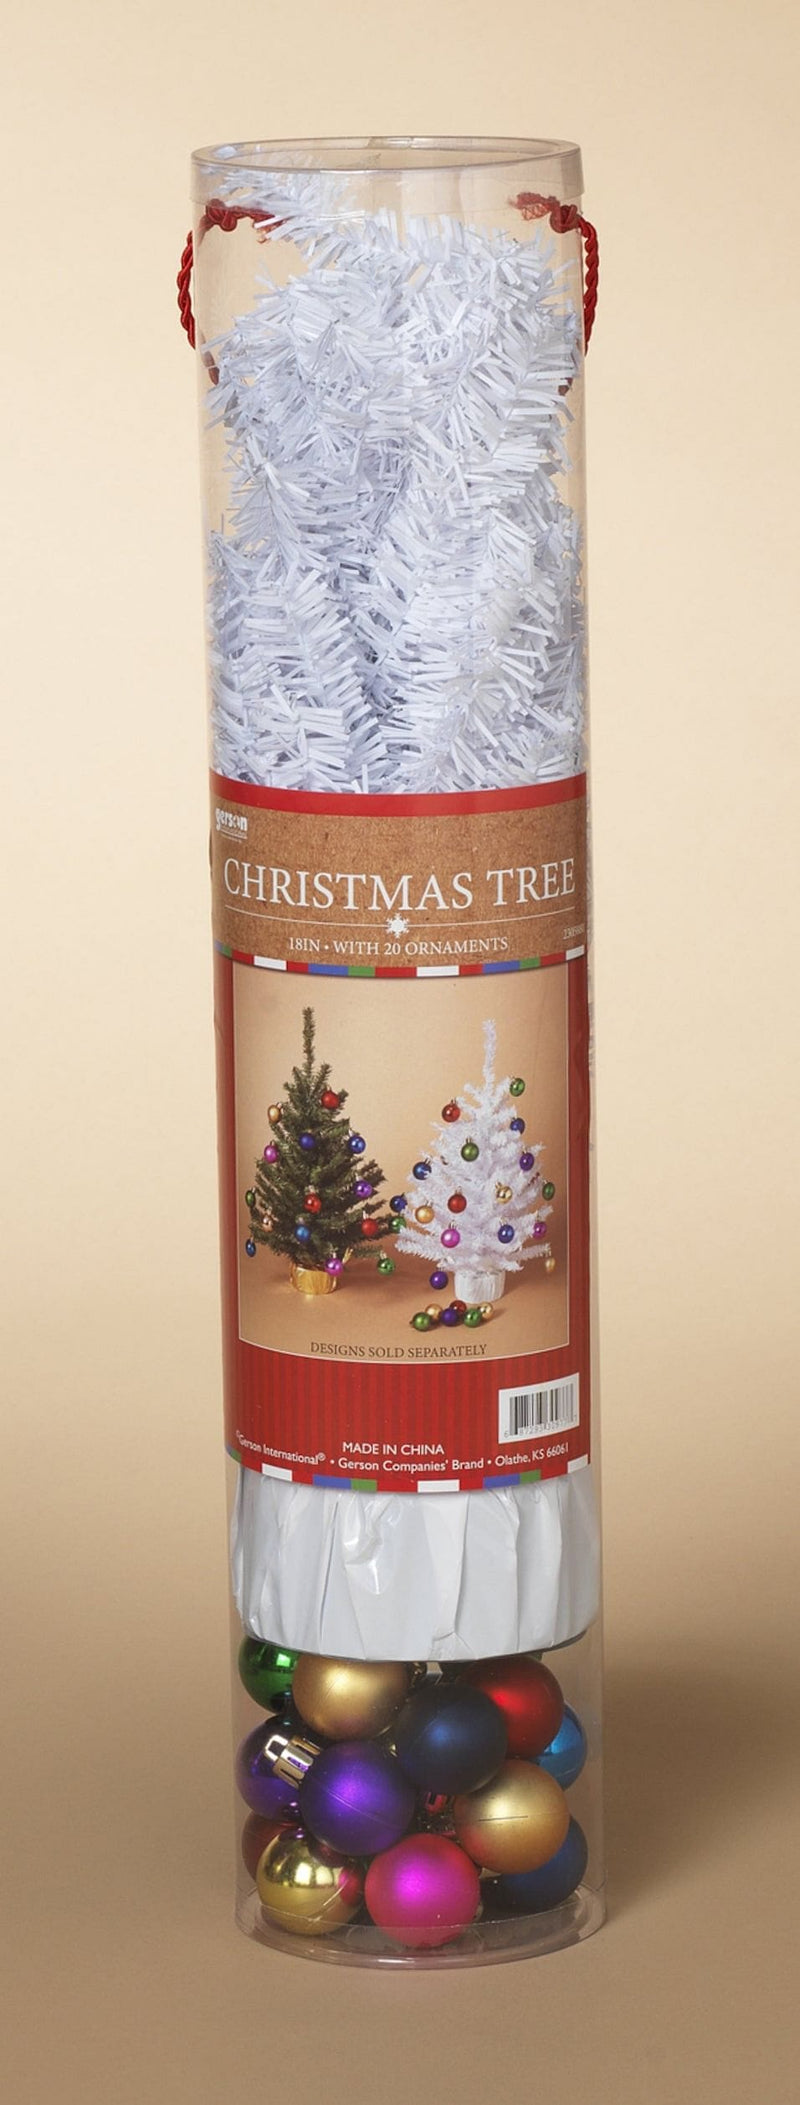 18 Inch Christmas Tree with 20 Ornaments - White - Shelburne Country Store